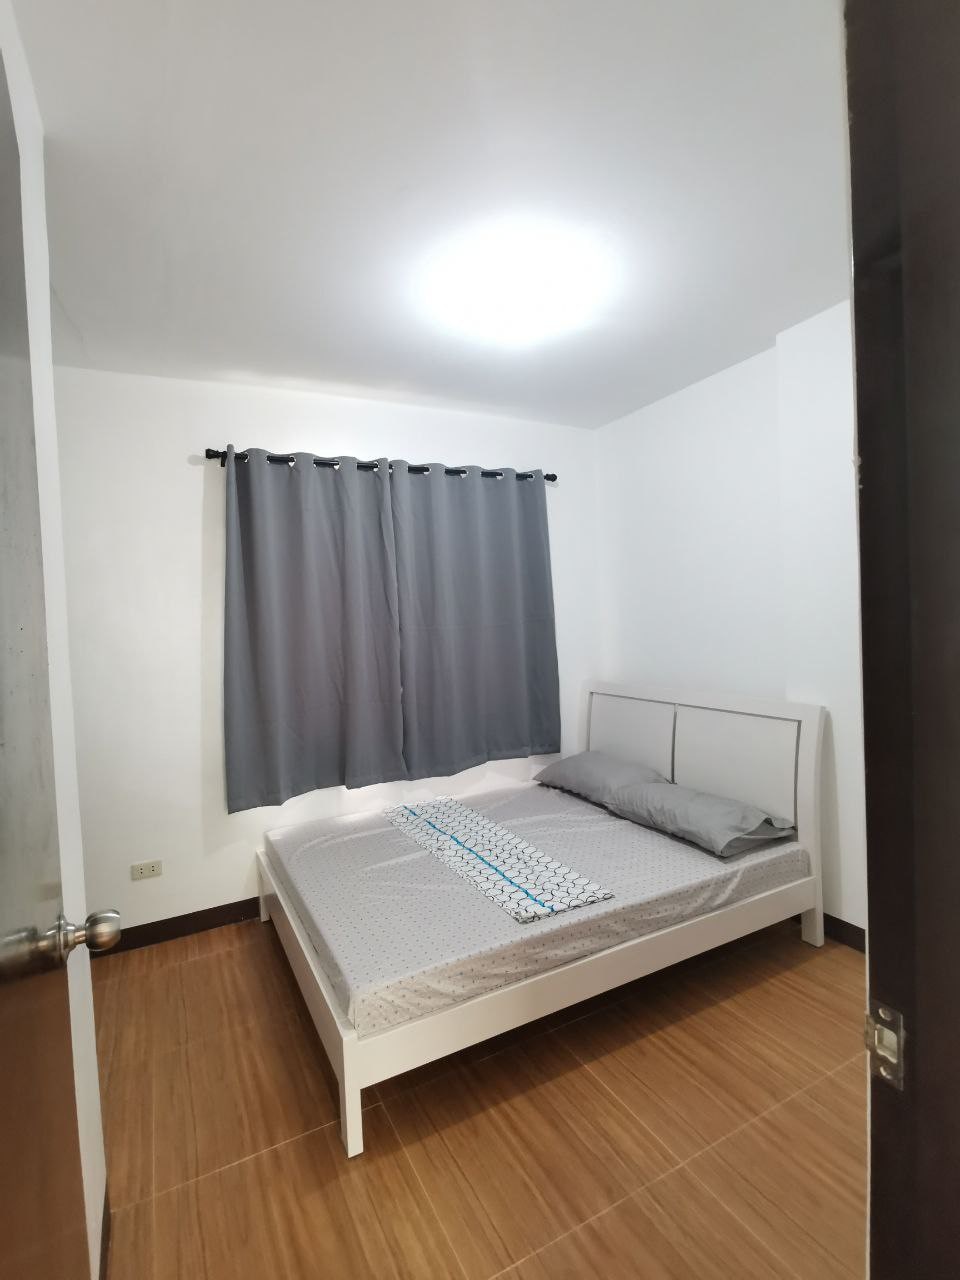 Affordable House for rent @ Bamboo Lane Uptown Cdo